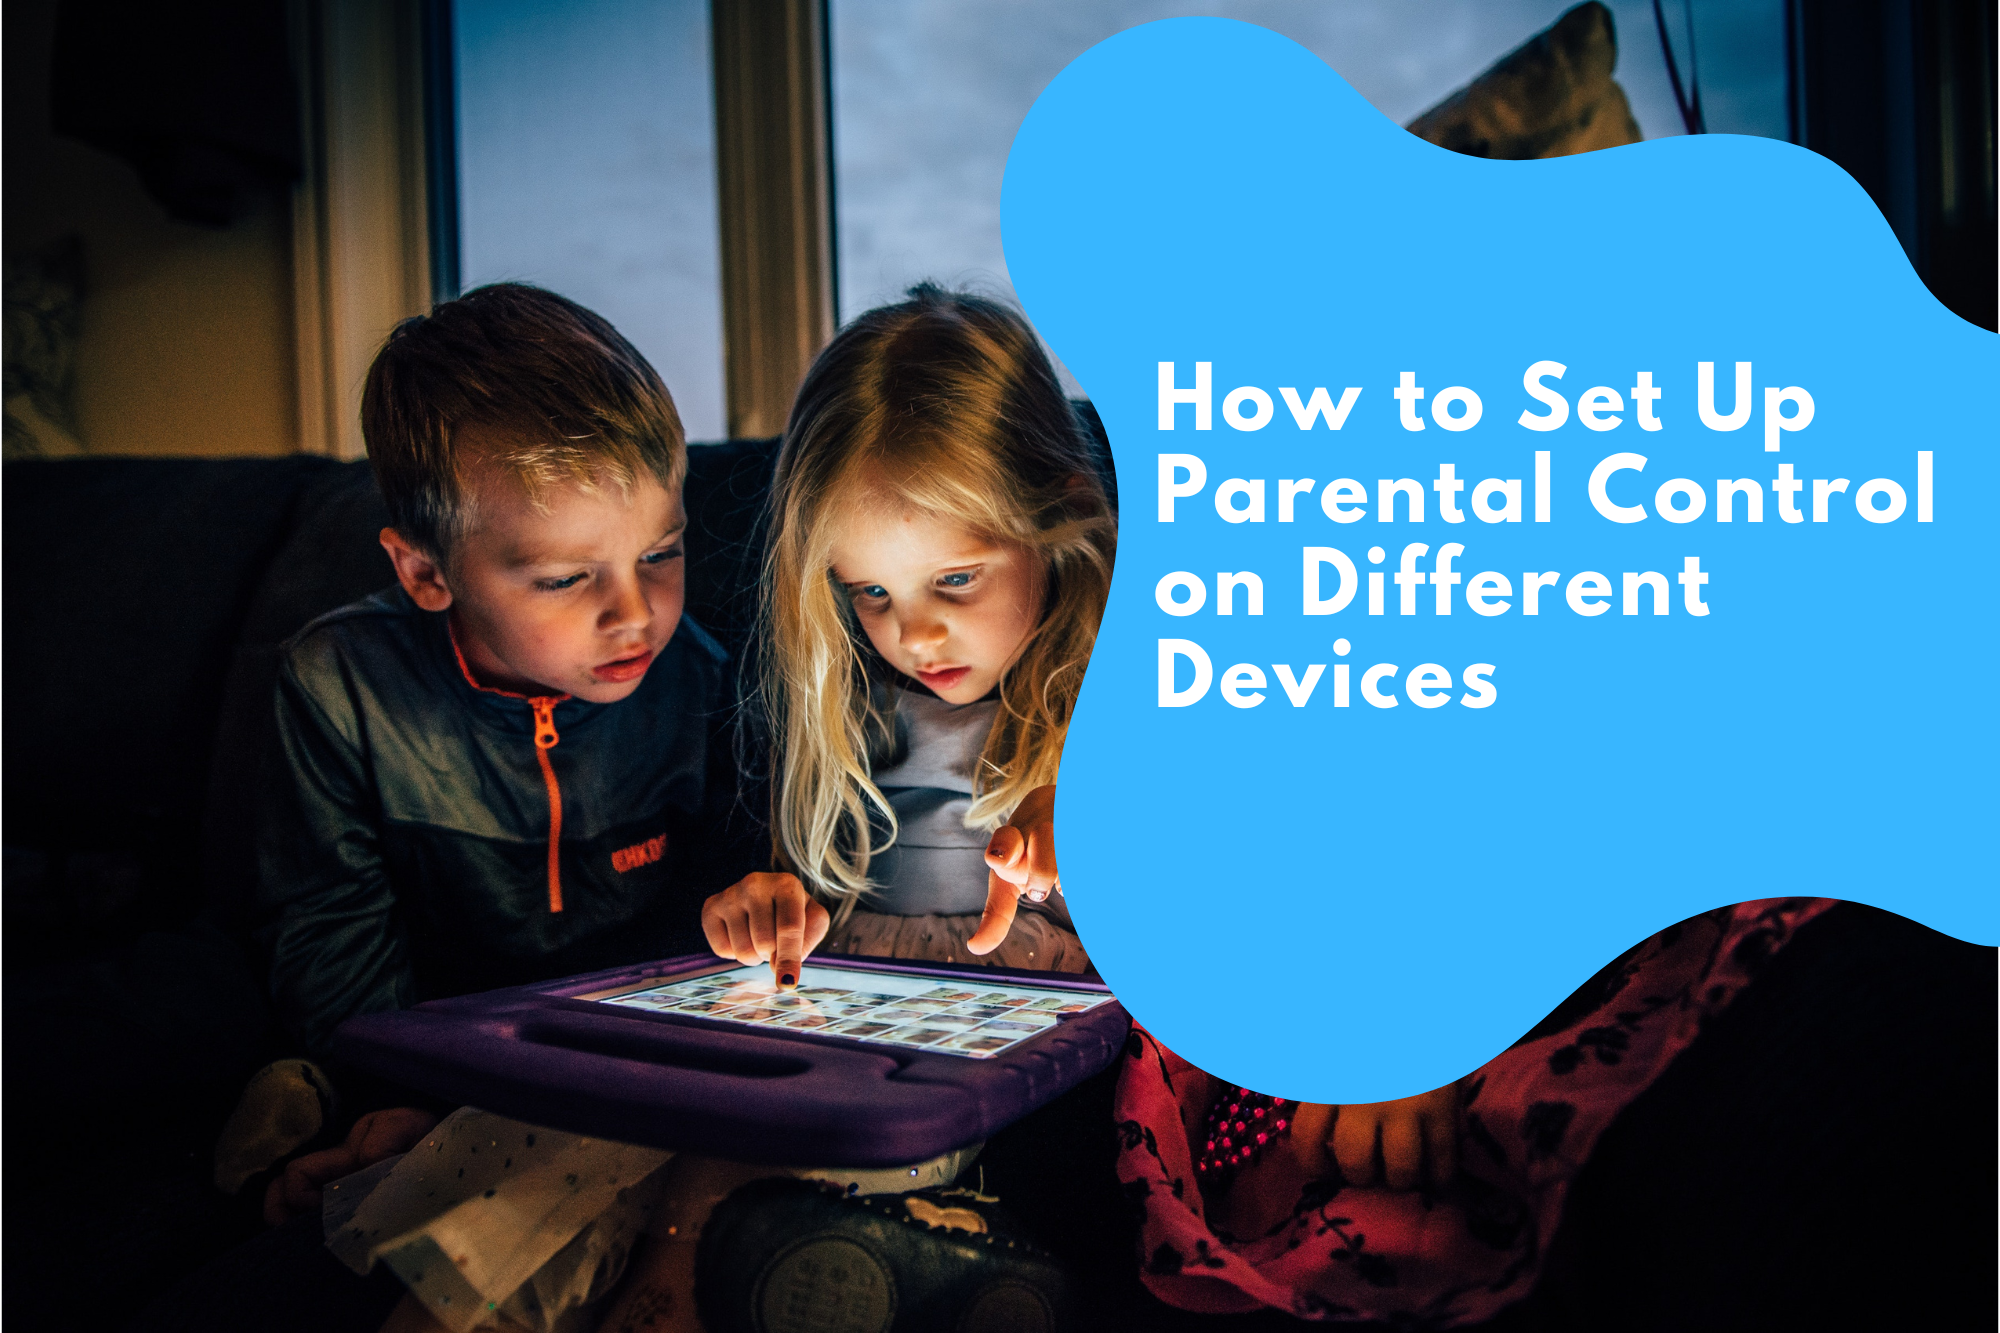 Parental control is a term for the digital features and tools that allow parents to set limits on their child's online activities.